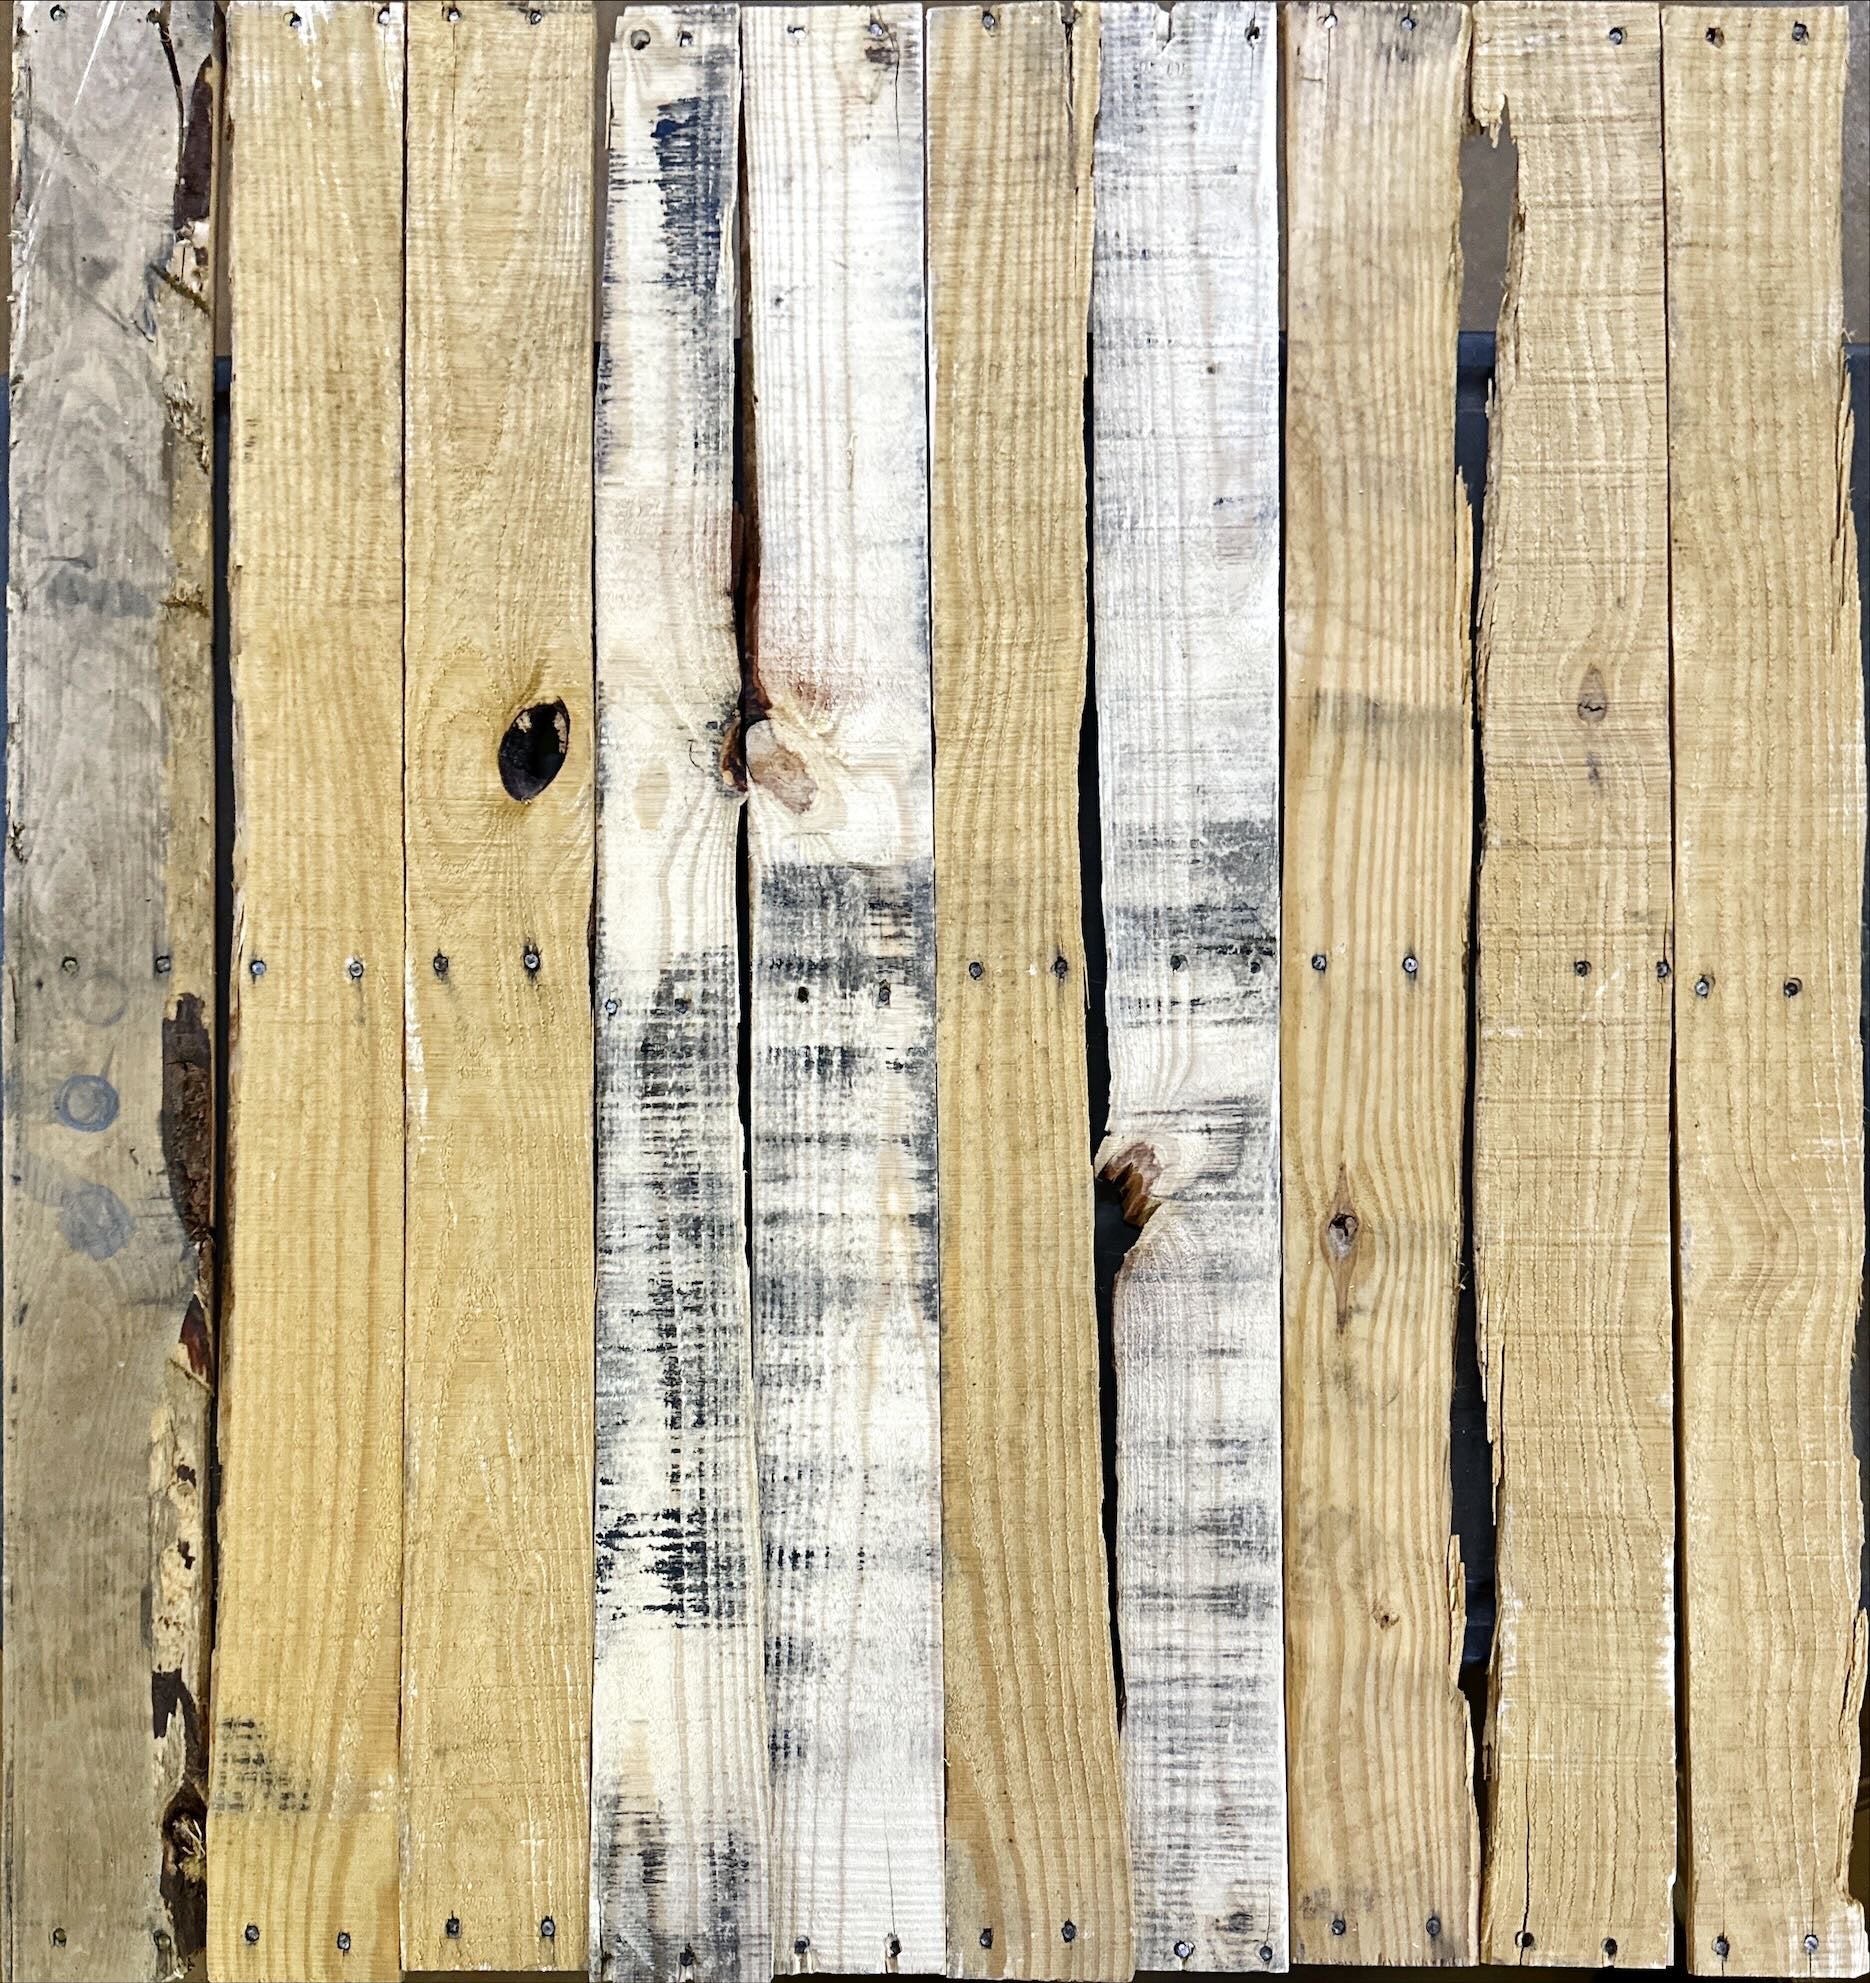 10 x 5ft Reclaimed Kiln Dried Pallet Boards - Wood Planks Timber Wall Fence